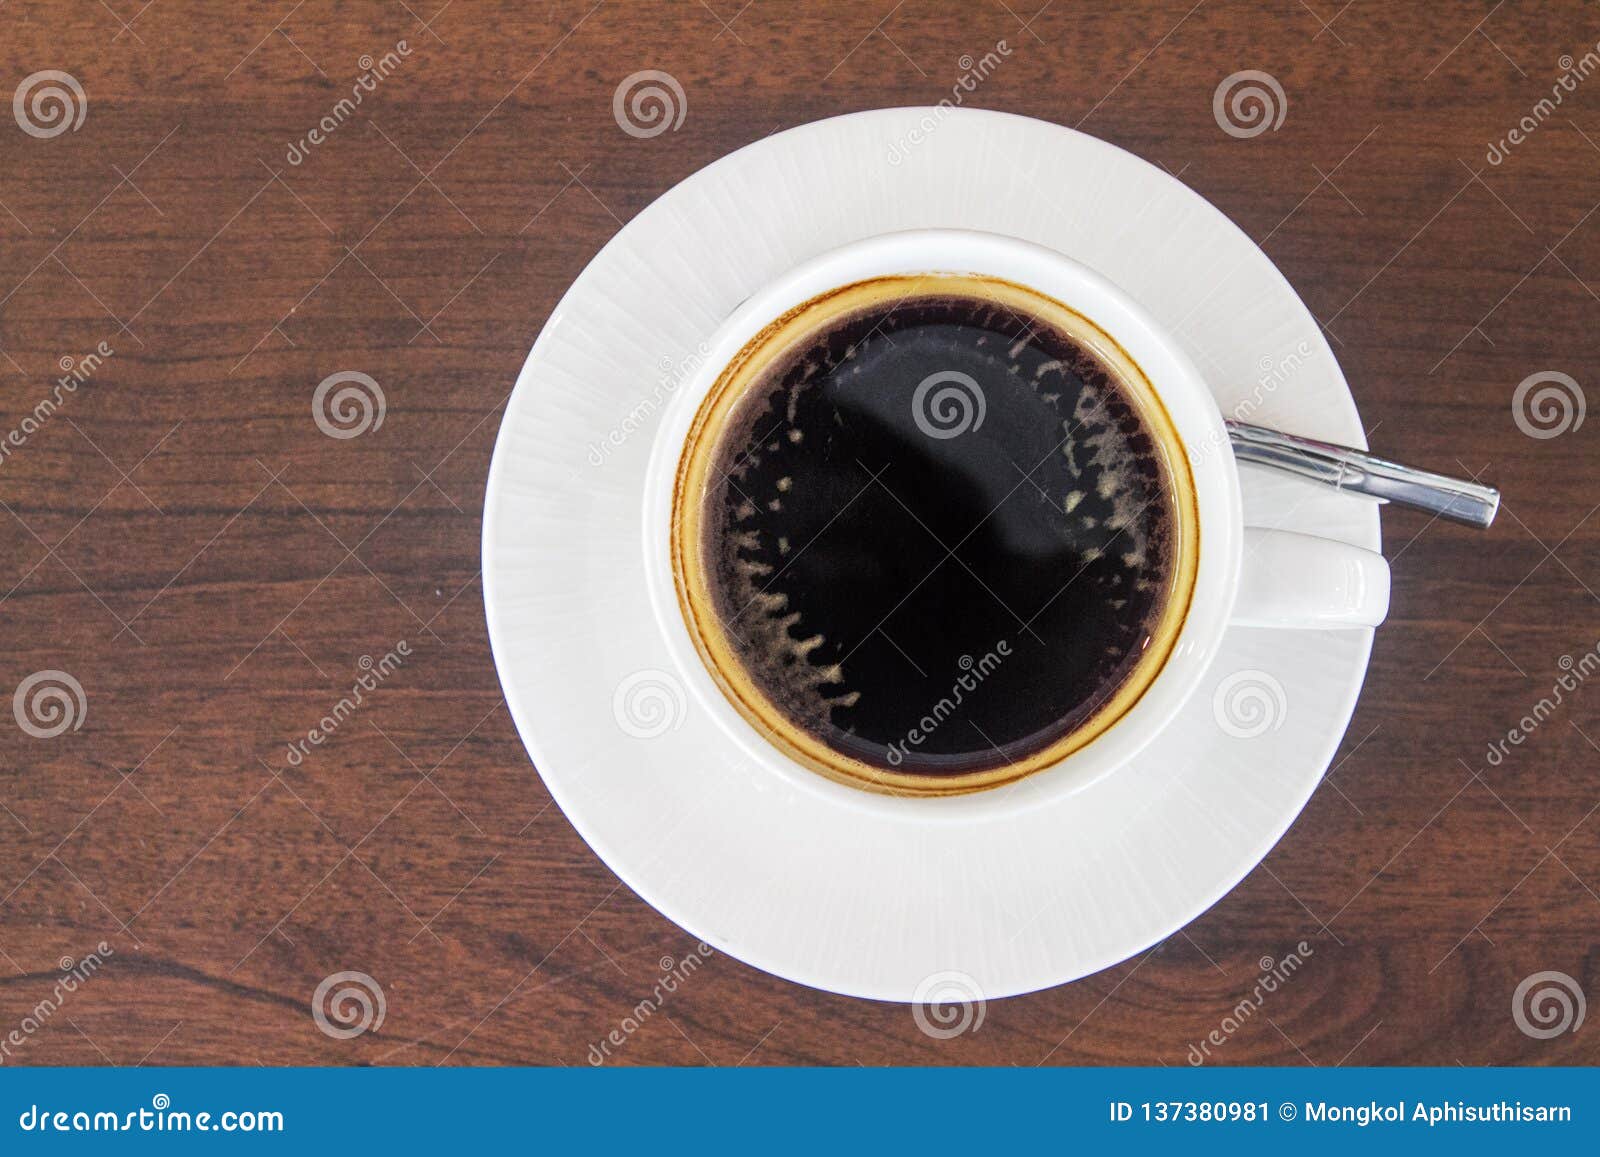 A Cup Of Black Coffee Or Americano Coffee Stock Image